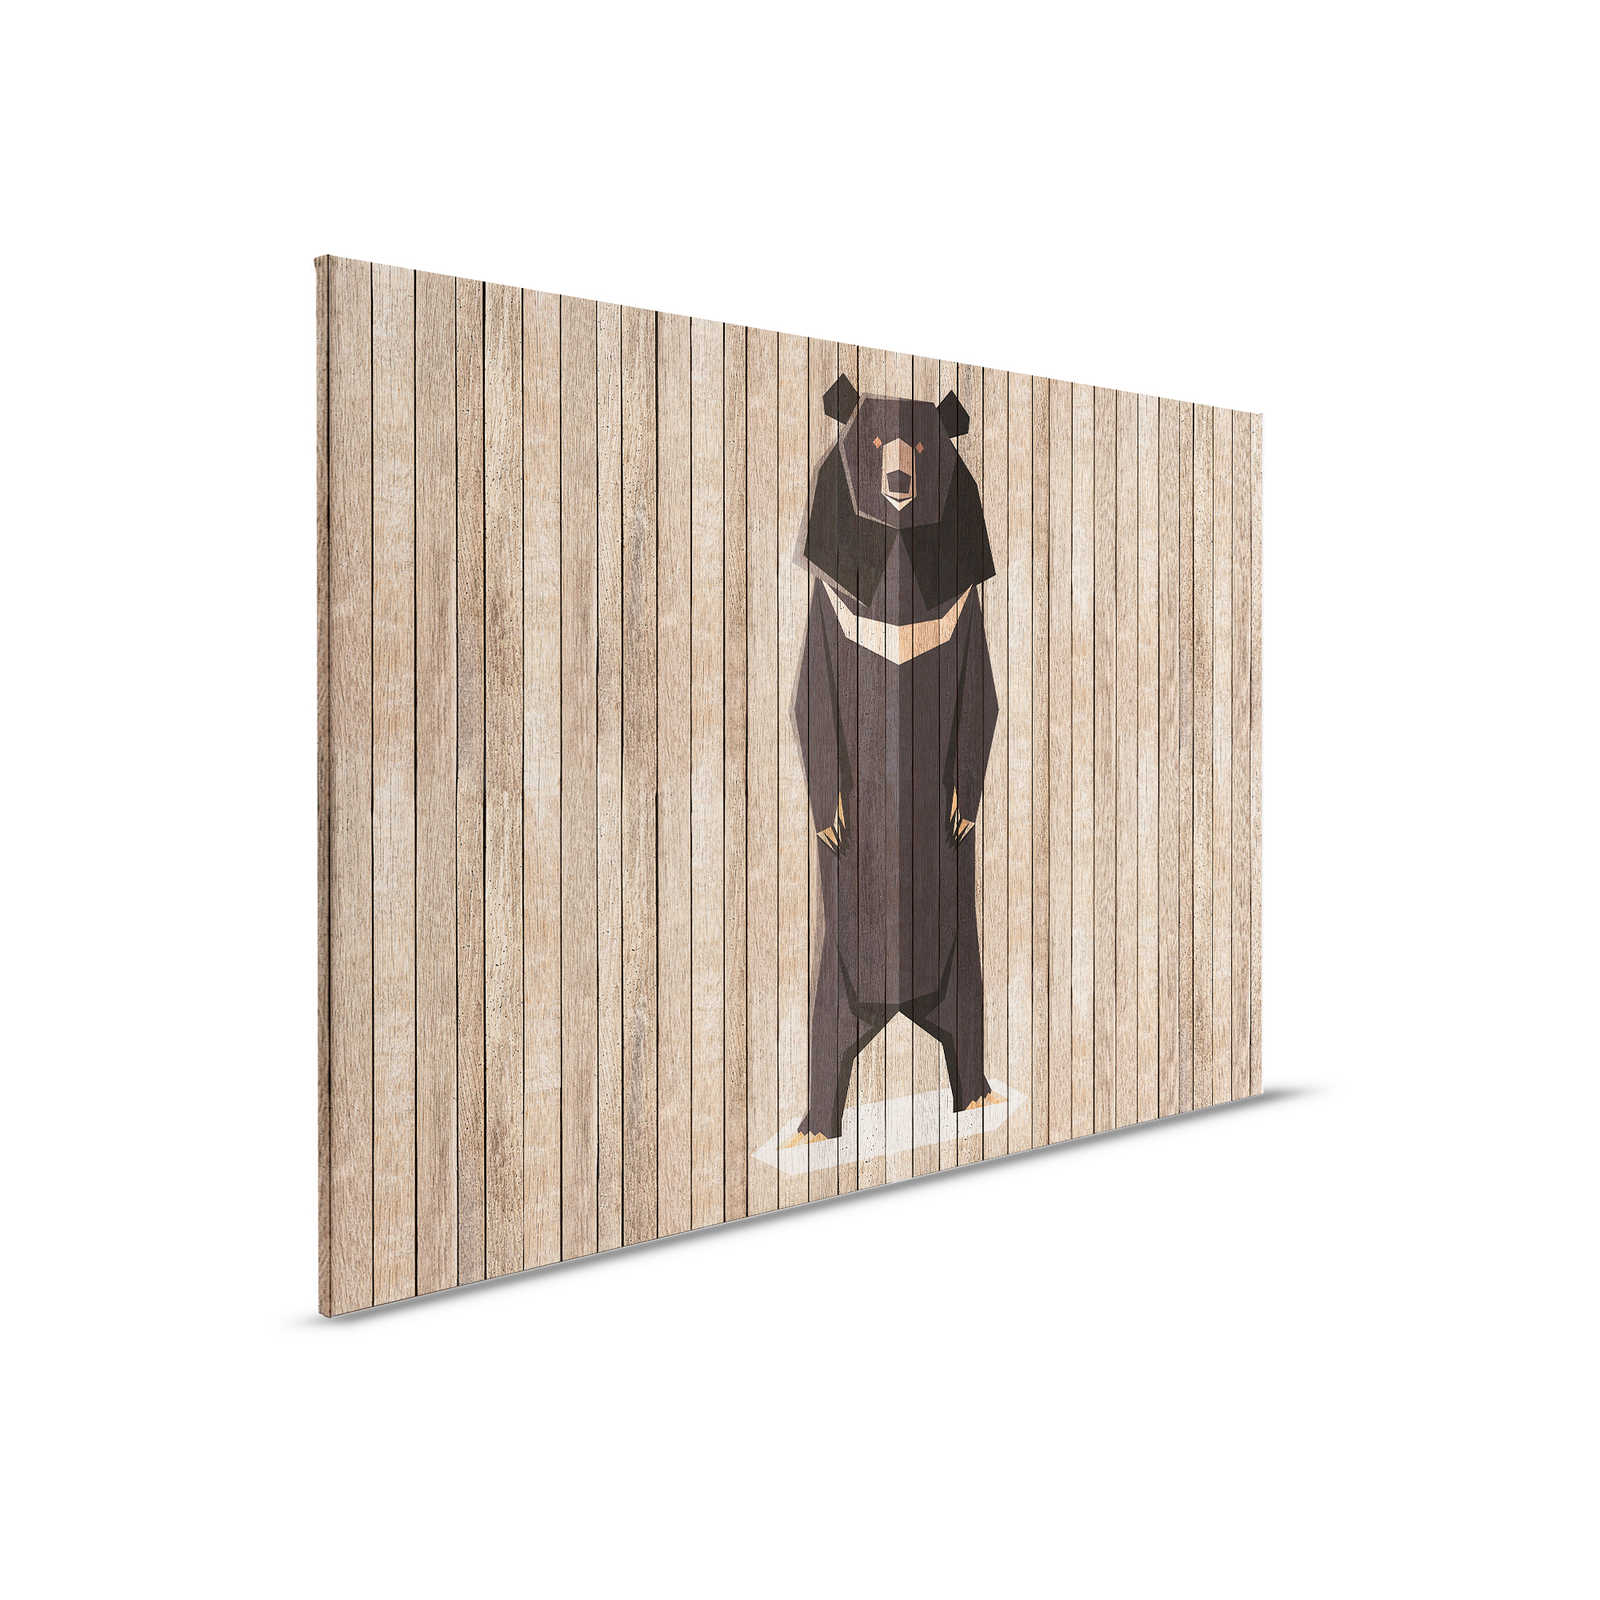 Born to Be Wild 1 - Canvas painting Board Wall with Bears - Wooden panels wide - 0.90 m x 0.60 m
